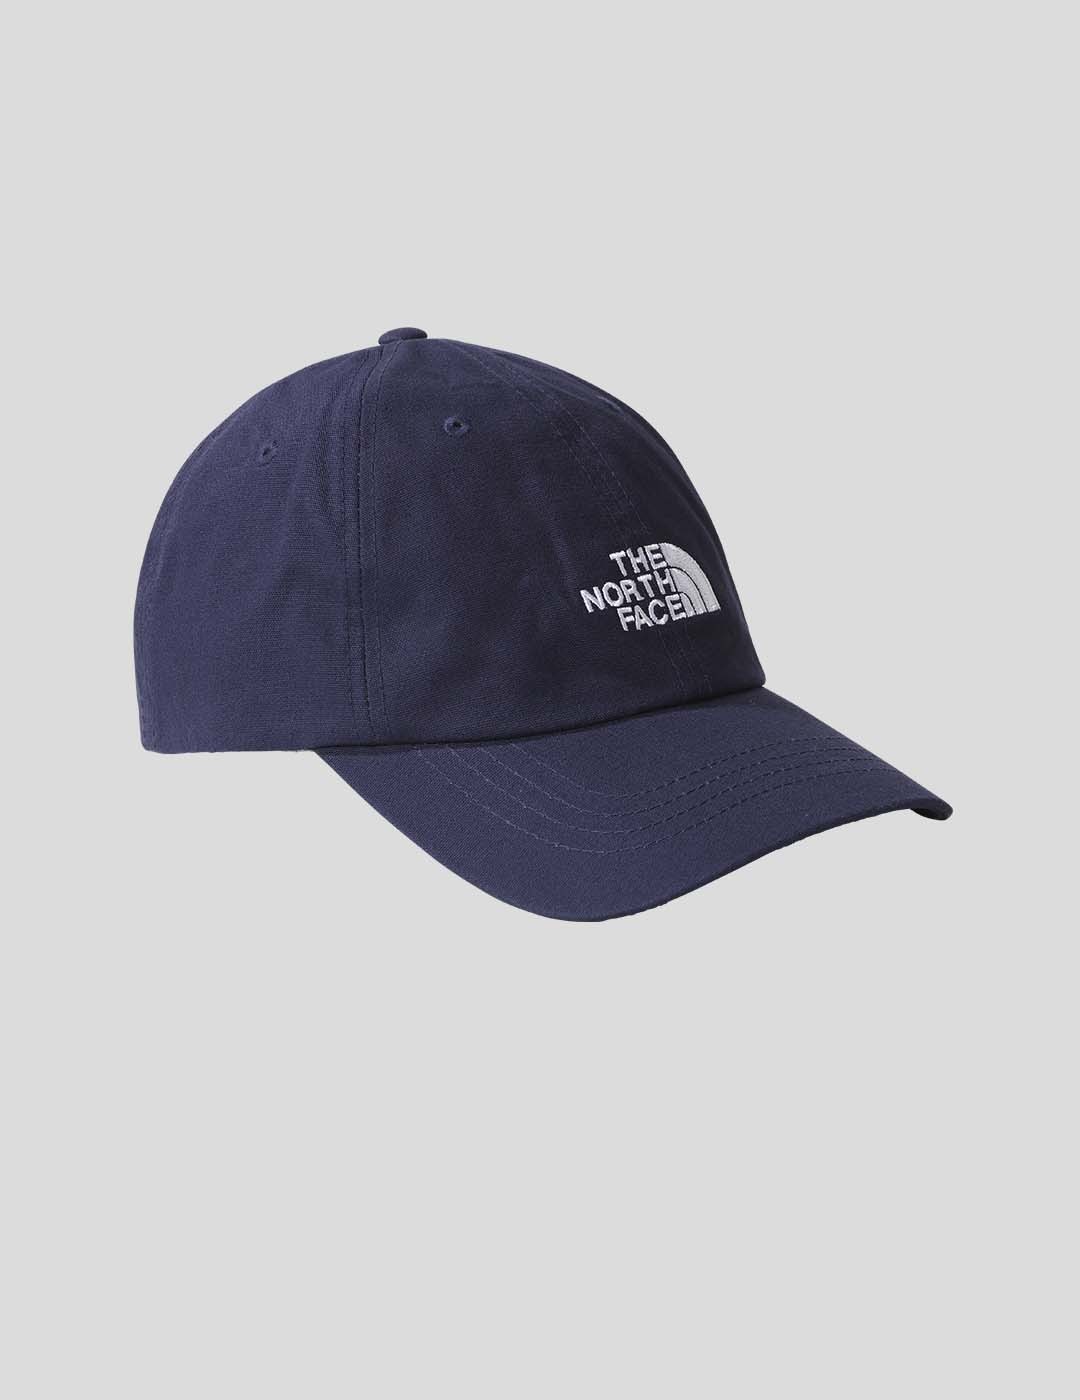 GORRA THE NORTH FACE NORM HAT SUMMIT NAVY